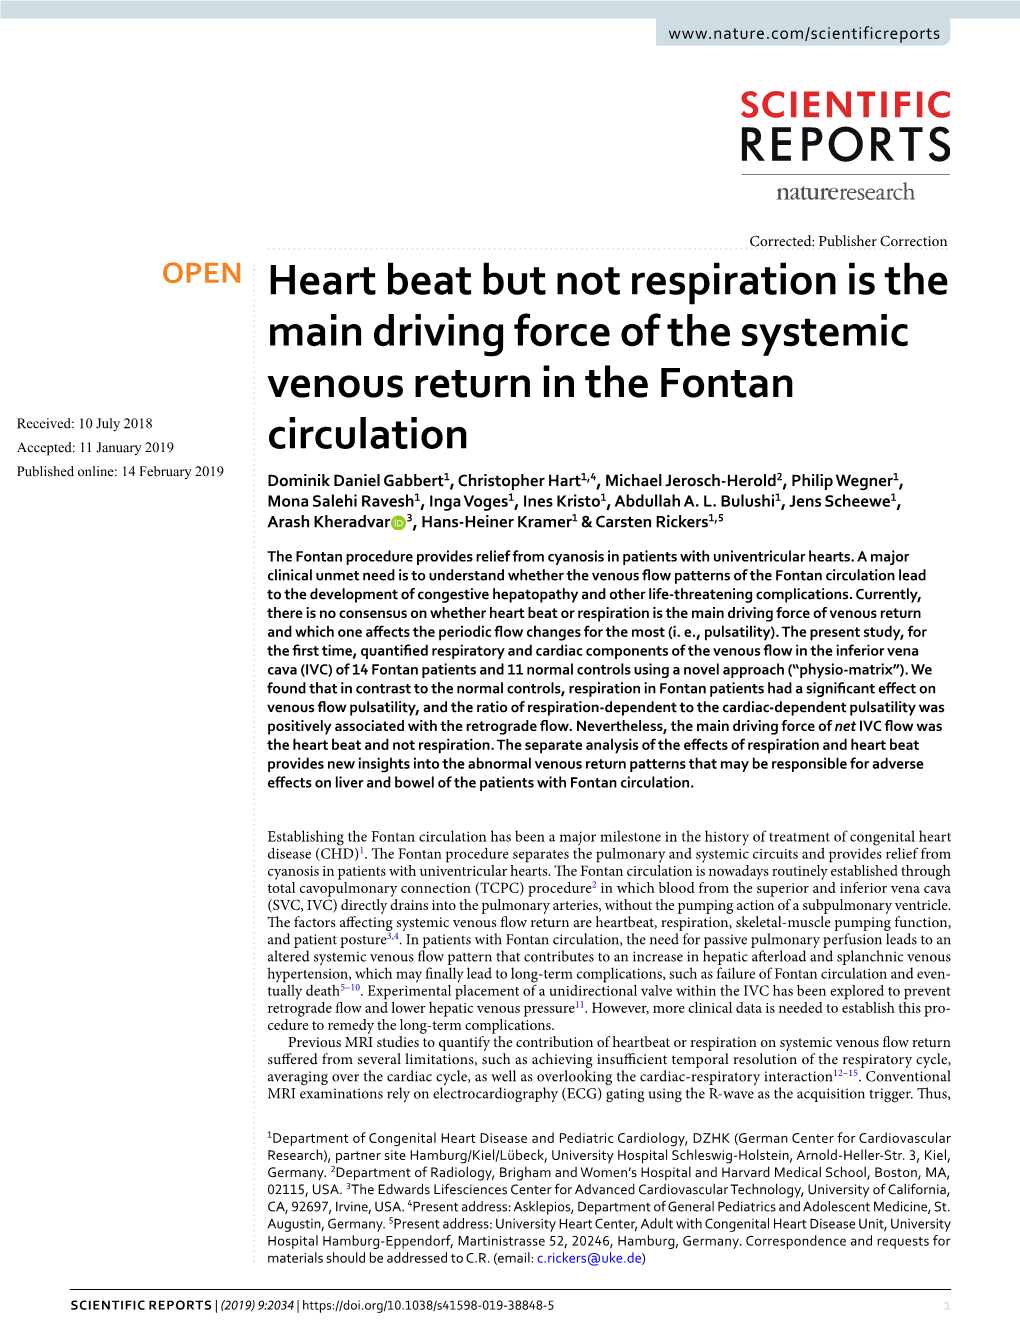 Heart Beat but Not Respiration Is the Main Driving Force of the Systemic